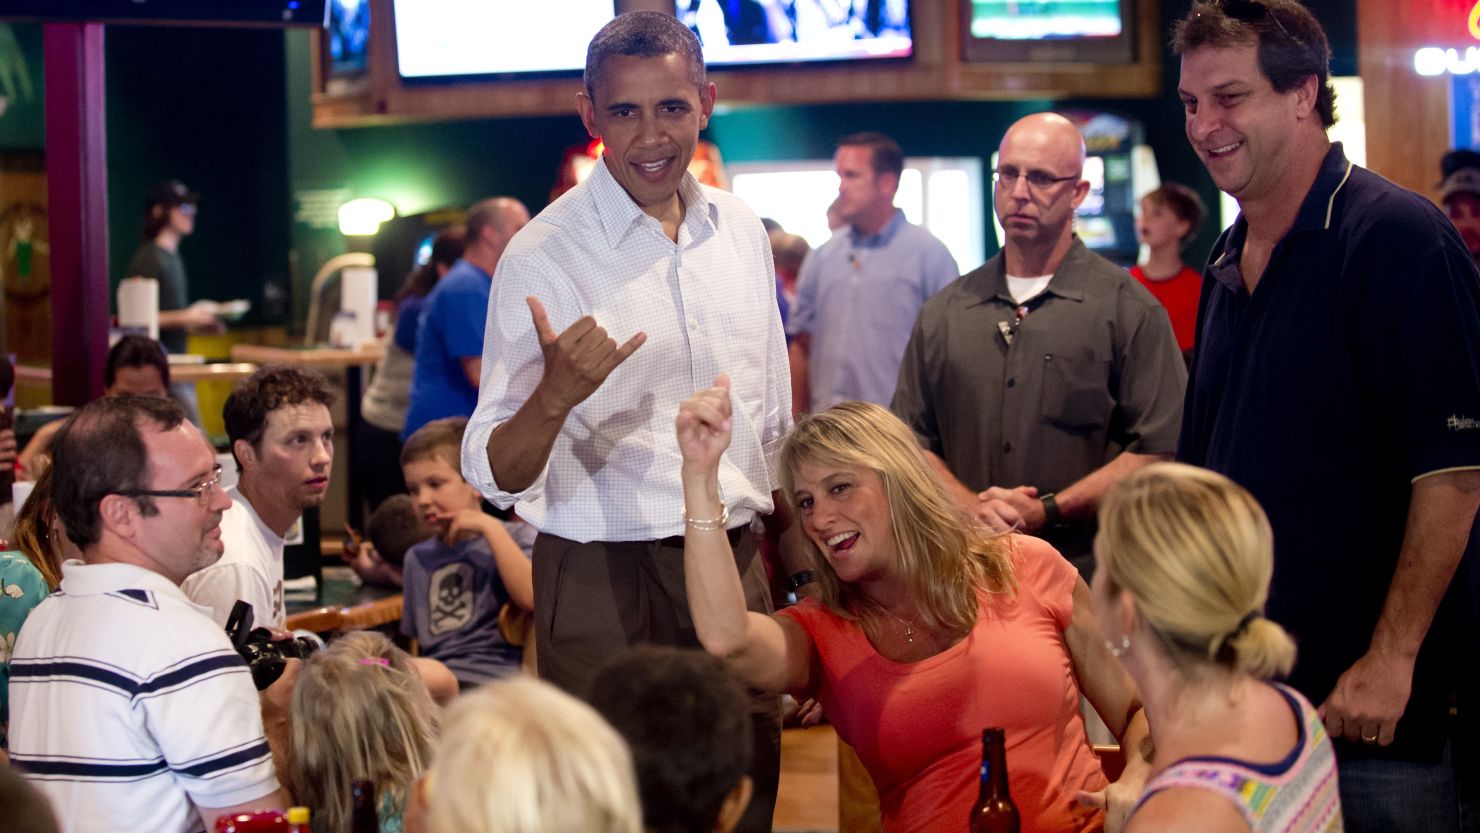 President Barack Obama, a native of Hawai, makes the Hawaiian symbol known as the "shaka" during a visit to a restaurant. While informal signs such as this are commonly seen, a genuine Hawaii Sign Language has been documented by researchers in Manoa.